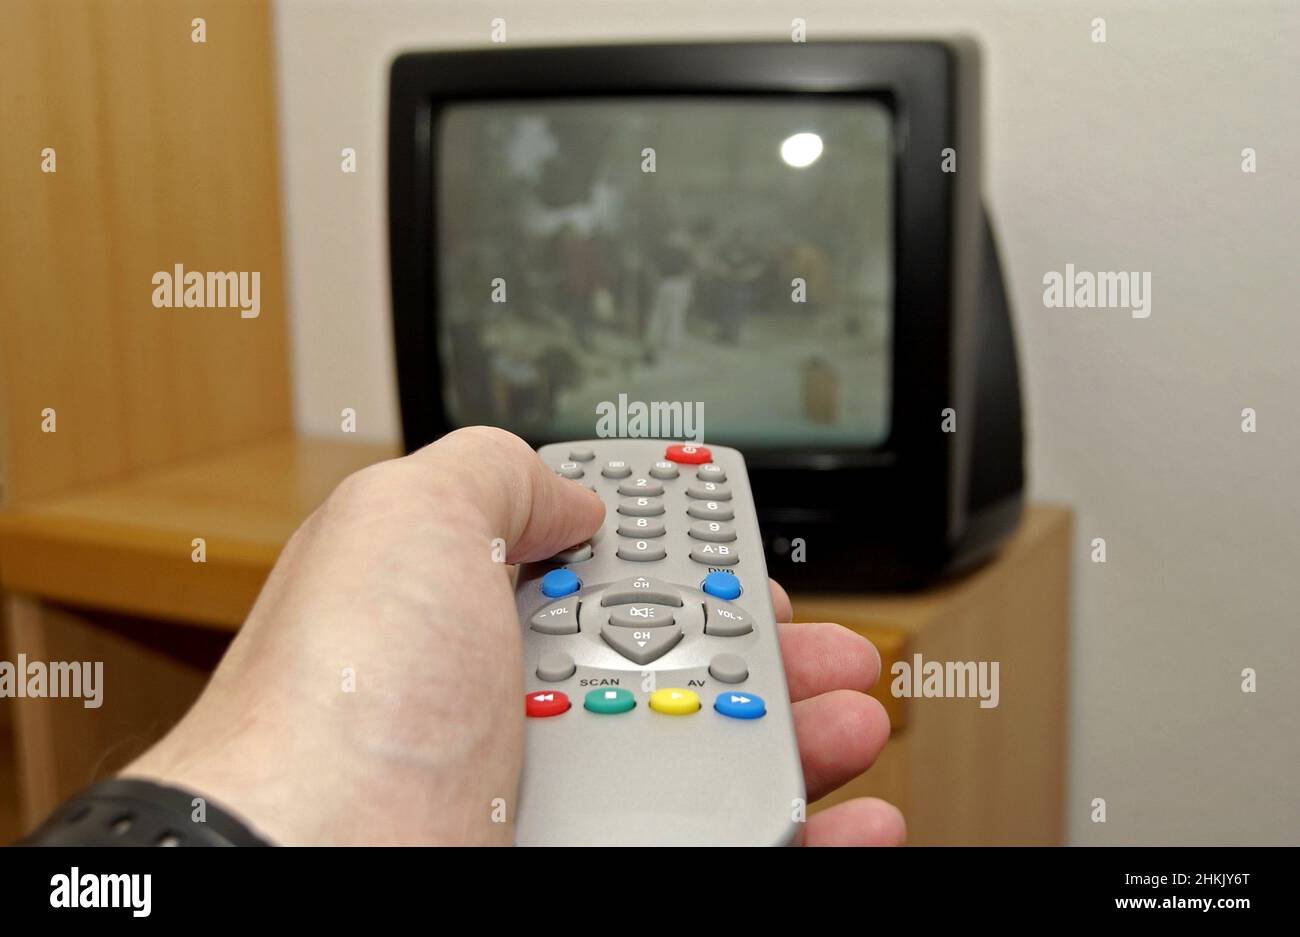 remote control of a television set, Germany Stock Photo